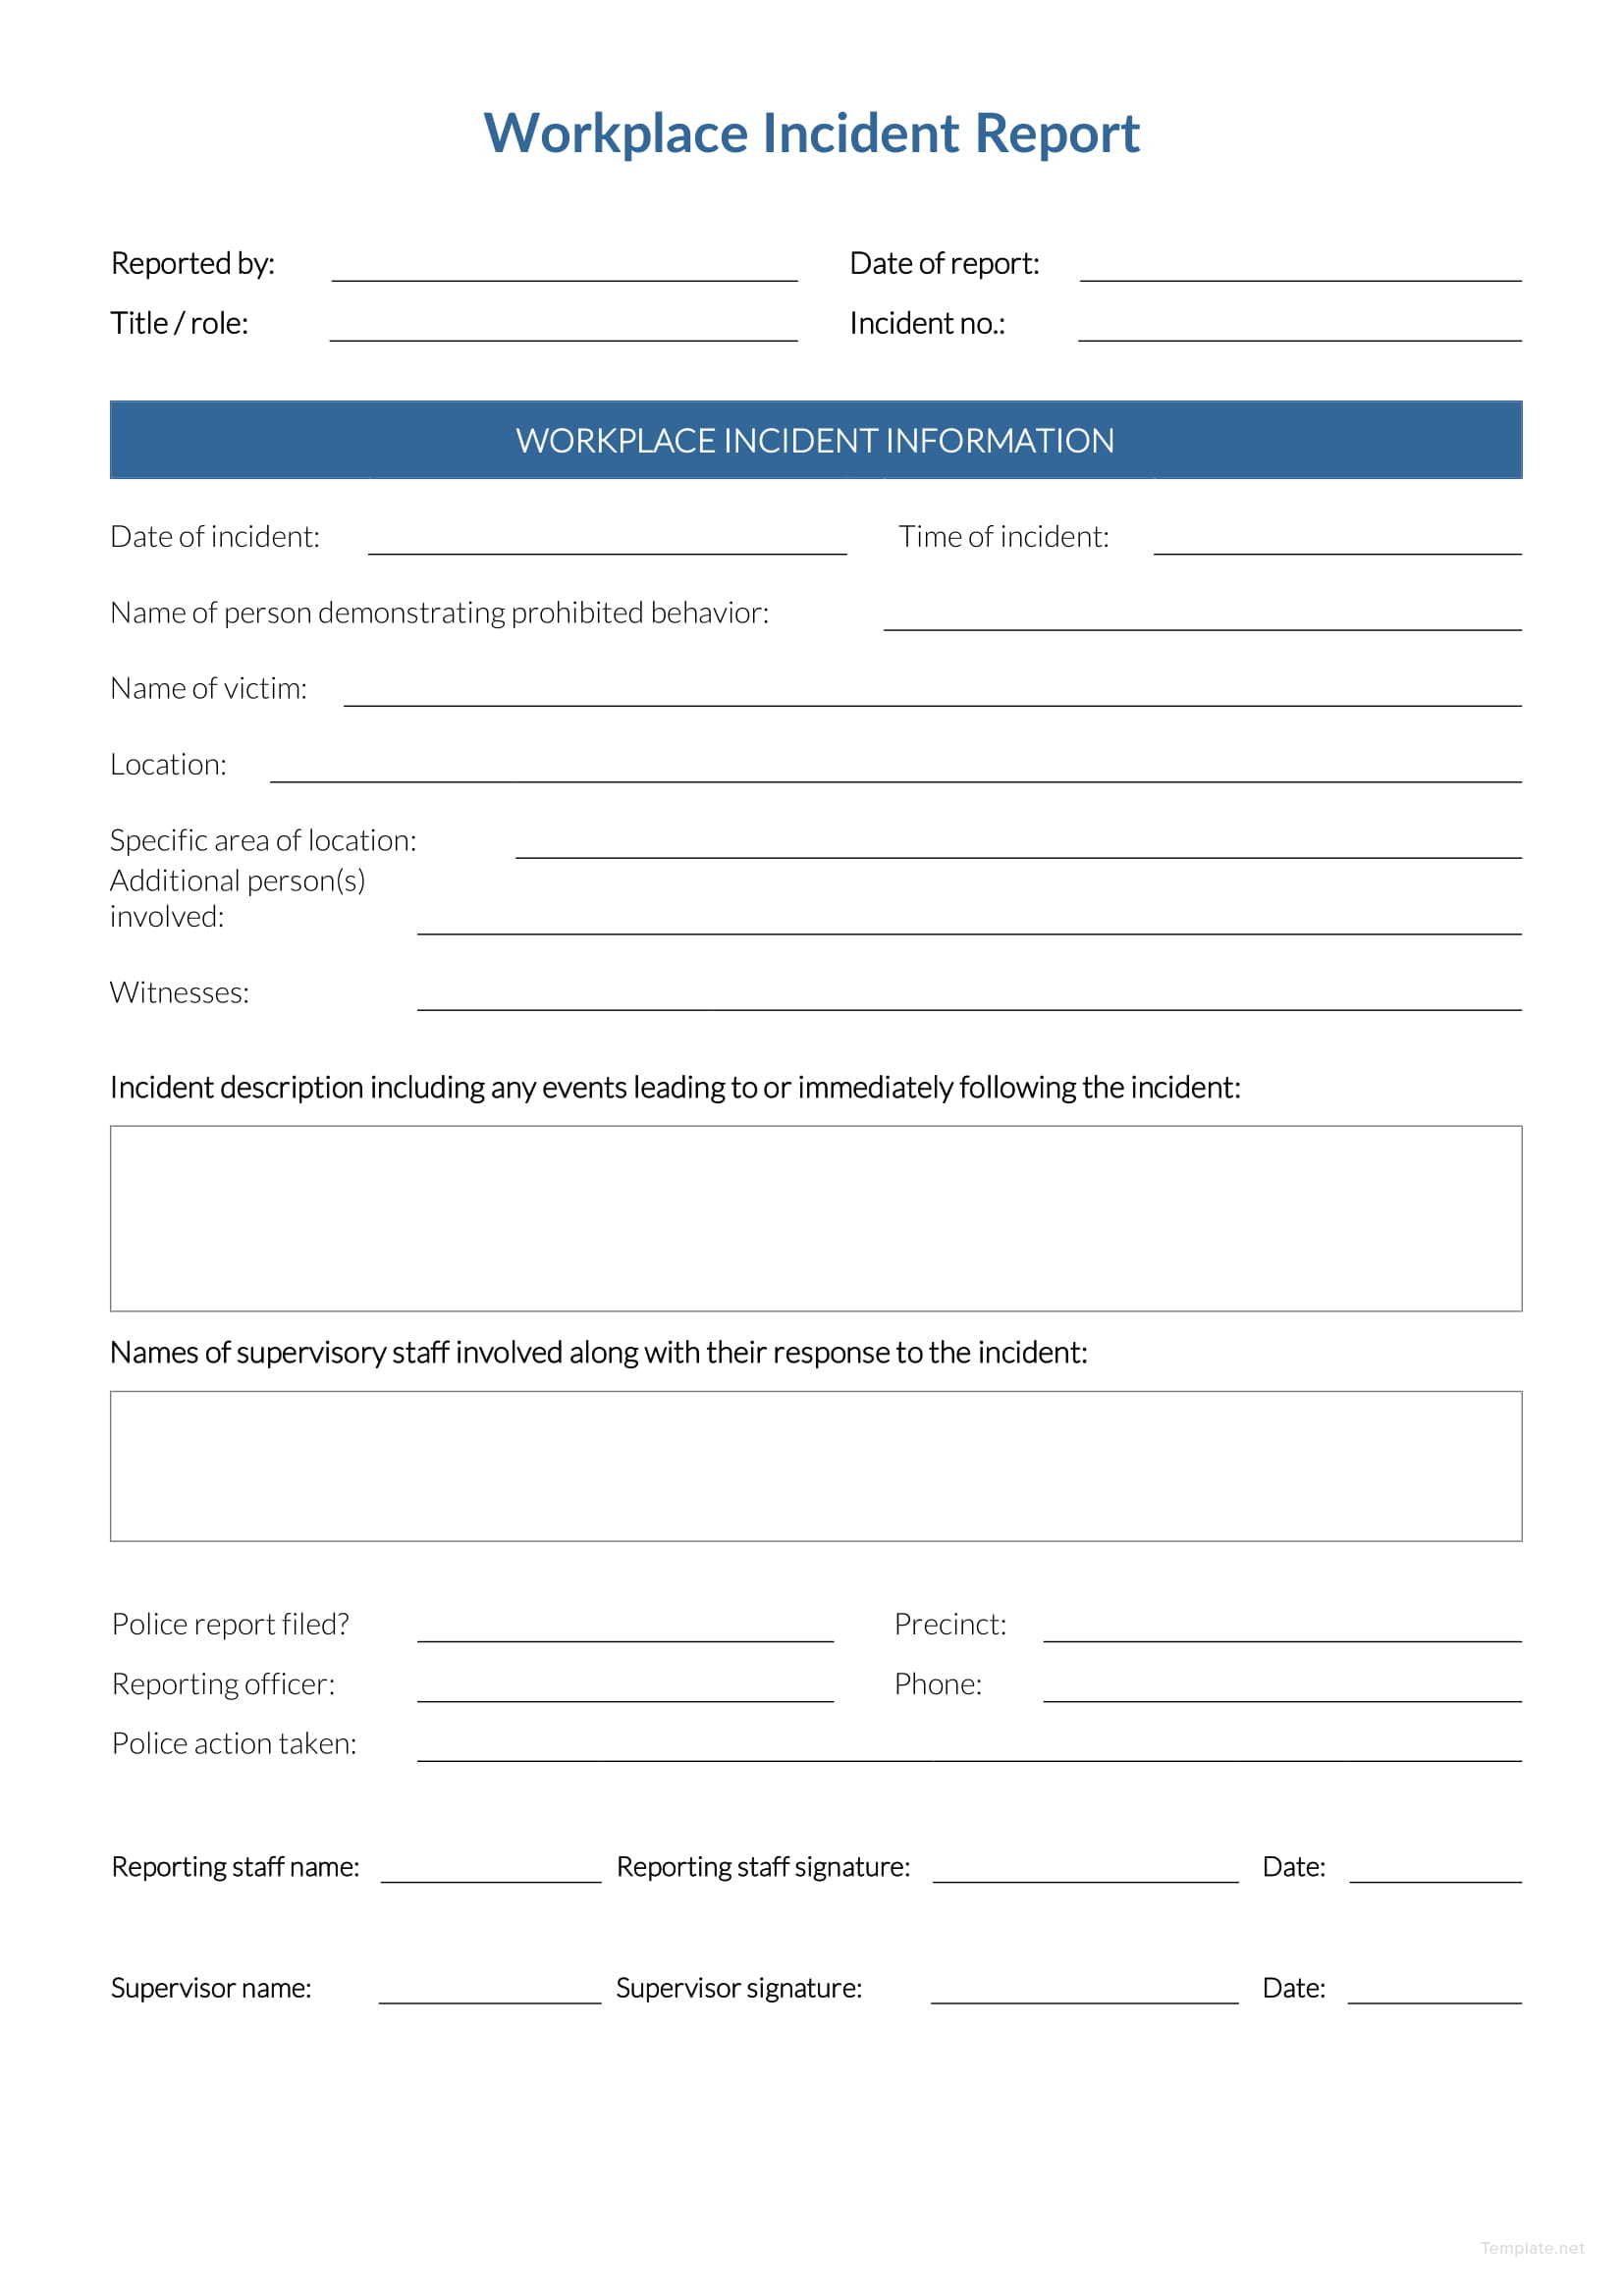 workplace-incident-report-template-in-microsoft-word-pdf-template